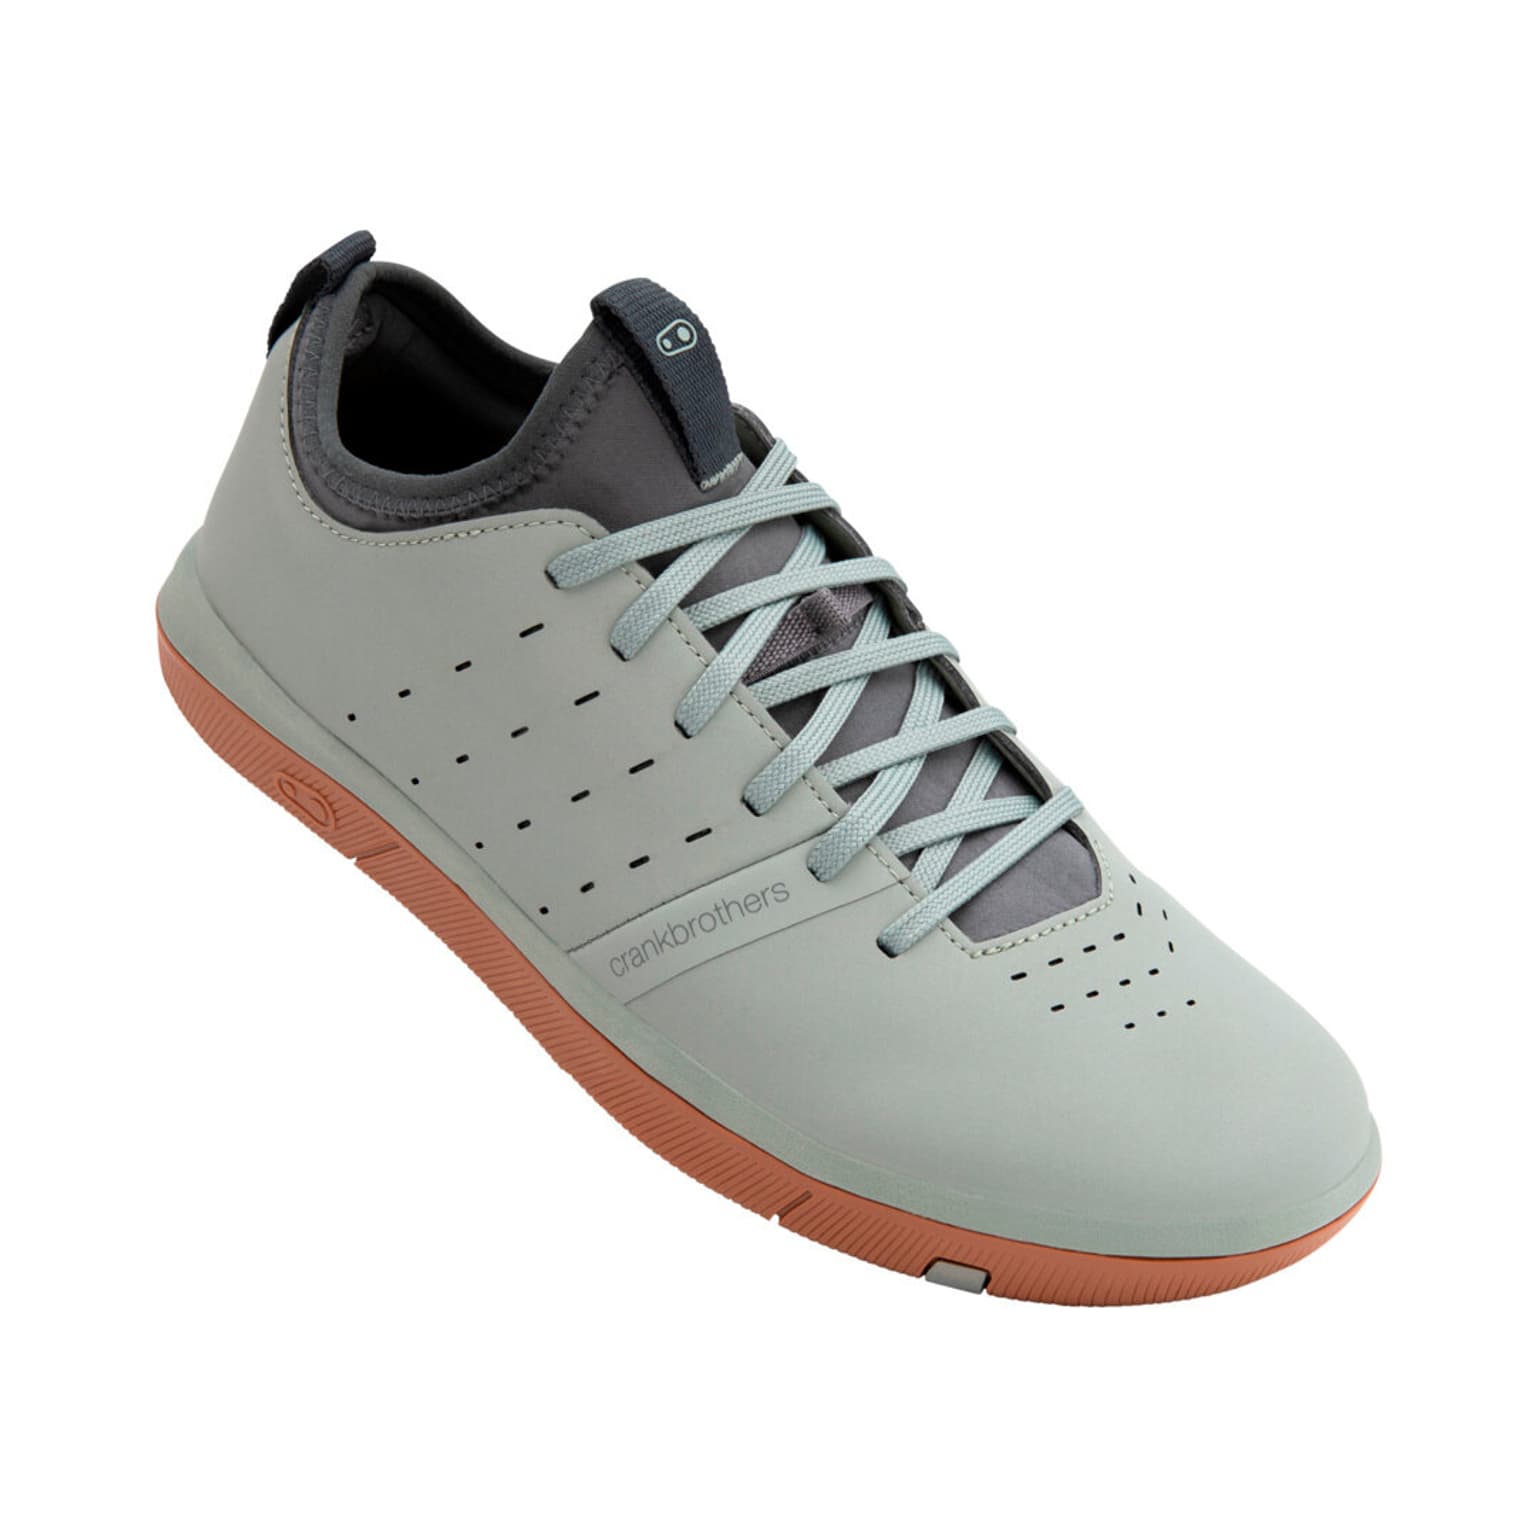 crankbrothers Stamp Street Lace Chaussures de cyclisme gris 2